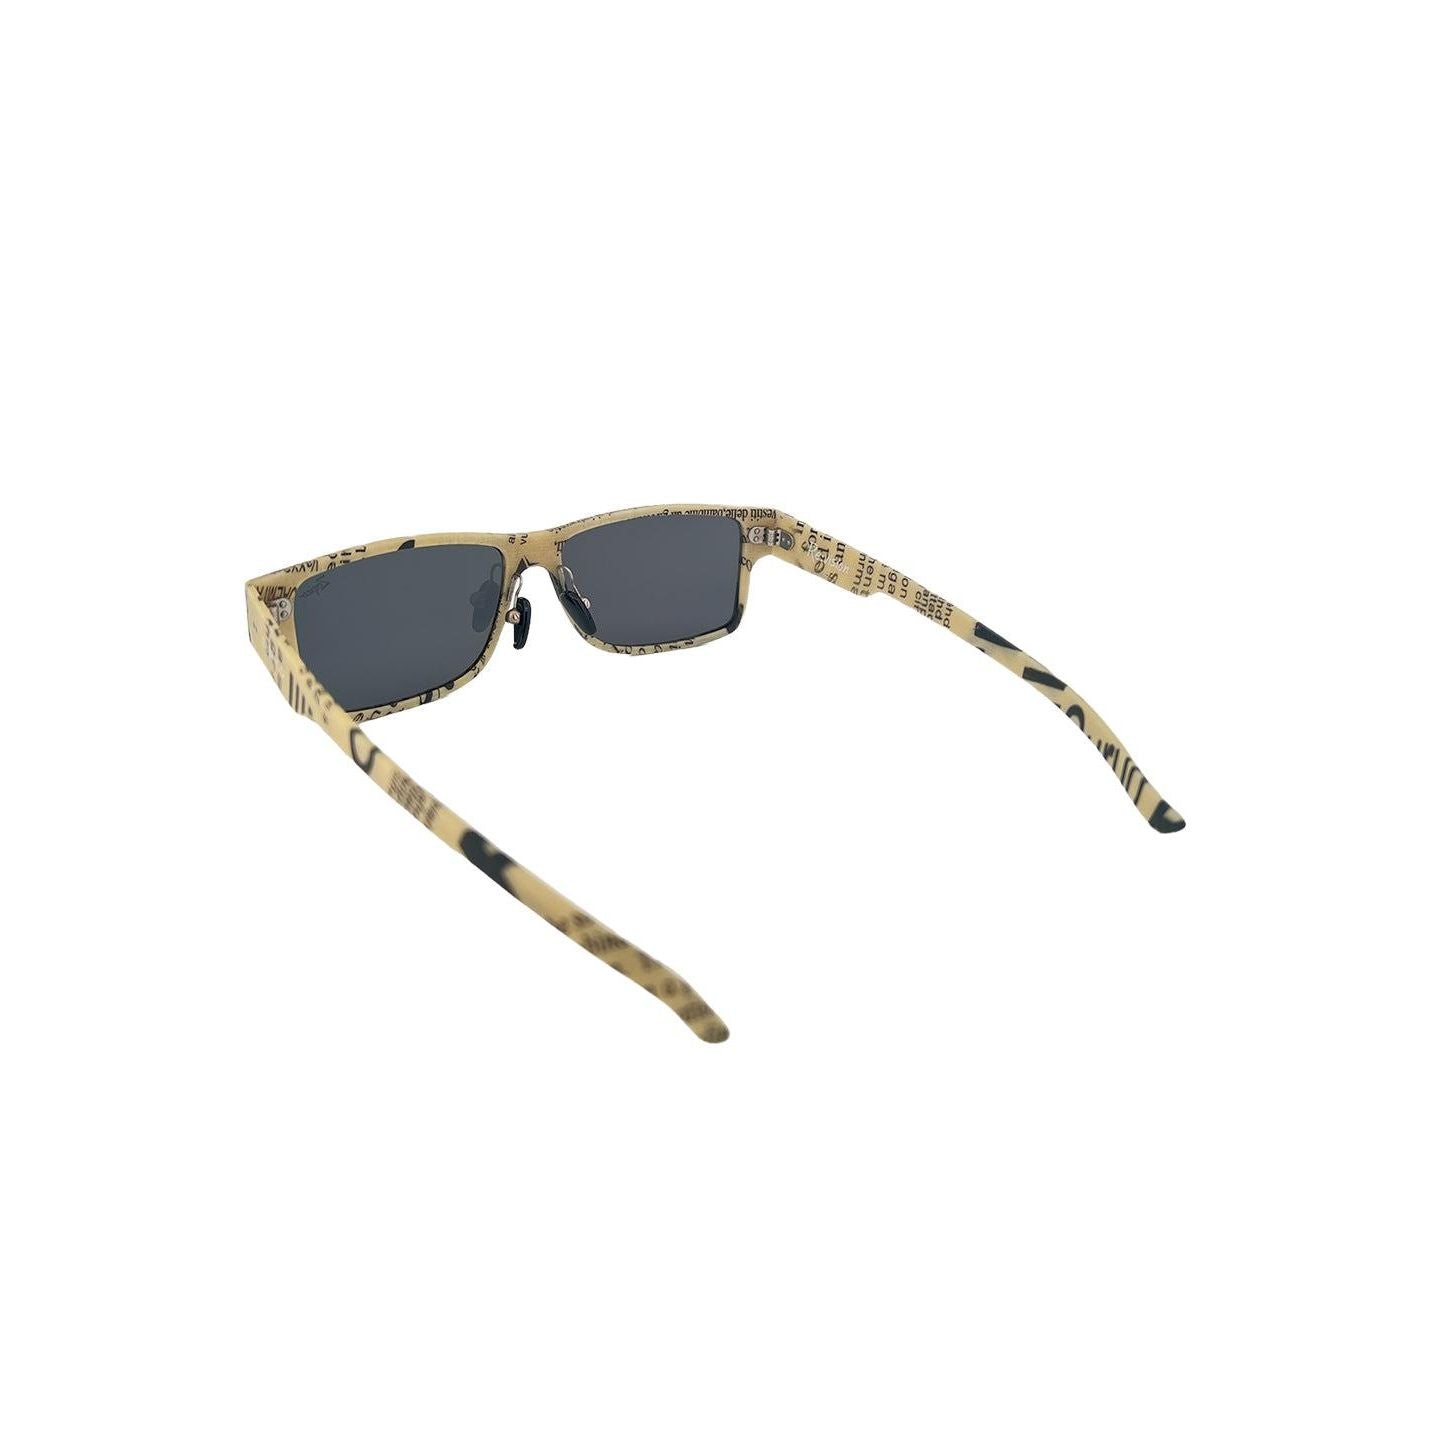 ReVision Square - Eco-Friendly Recyclable Paper Sunglasses - KME means the very best